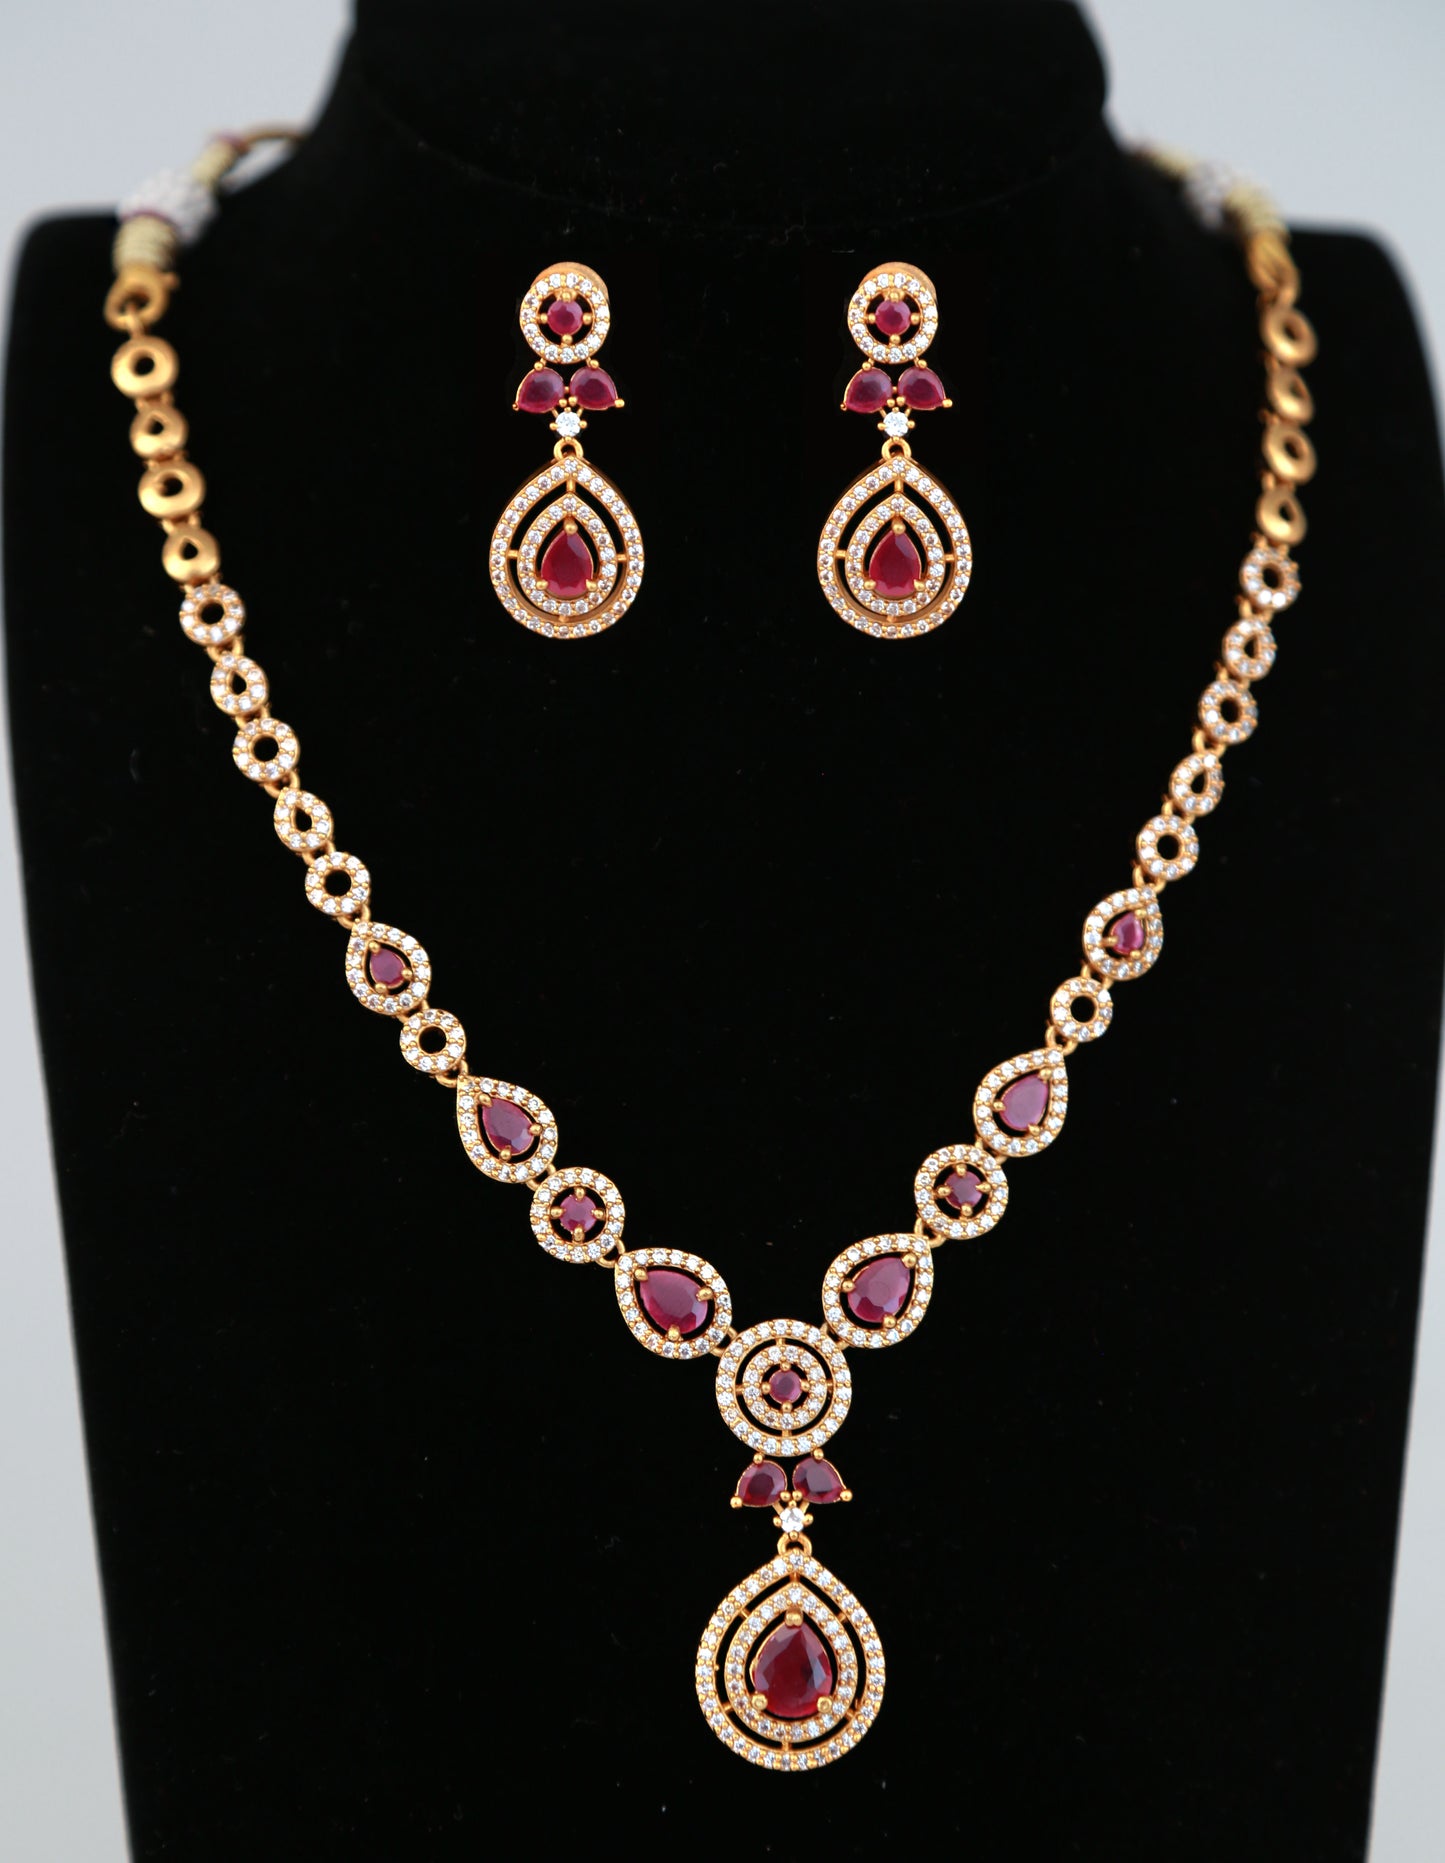 Antique Ruby American diamond South Indian Style necklace Earring set | Indian Designs Jewelry |Matte finish Indian Wedding Jewelry